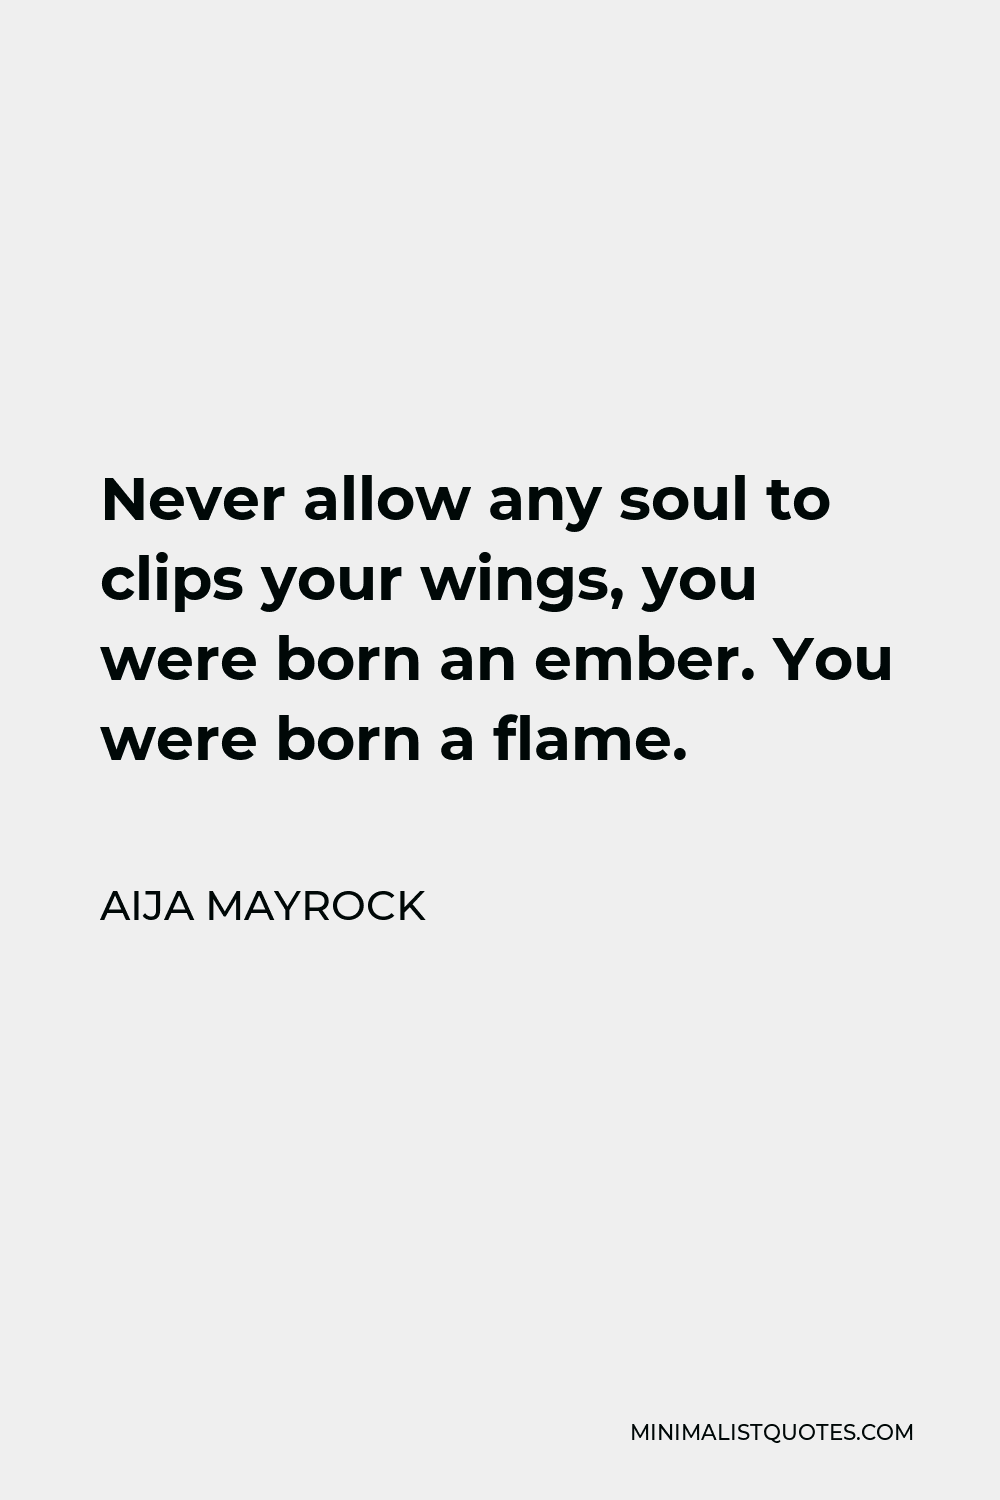 Aija Mayrock Quote - Never allow any soul to clips your wings, you were born an ember. You were born a flame.